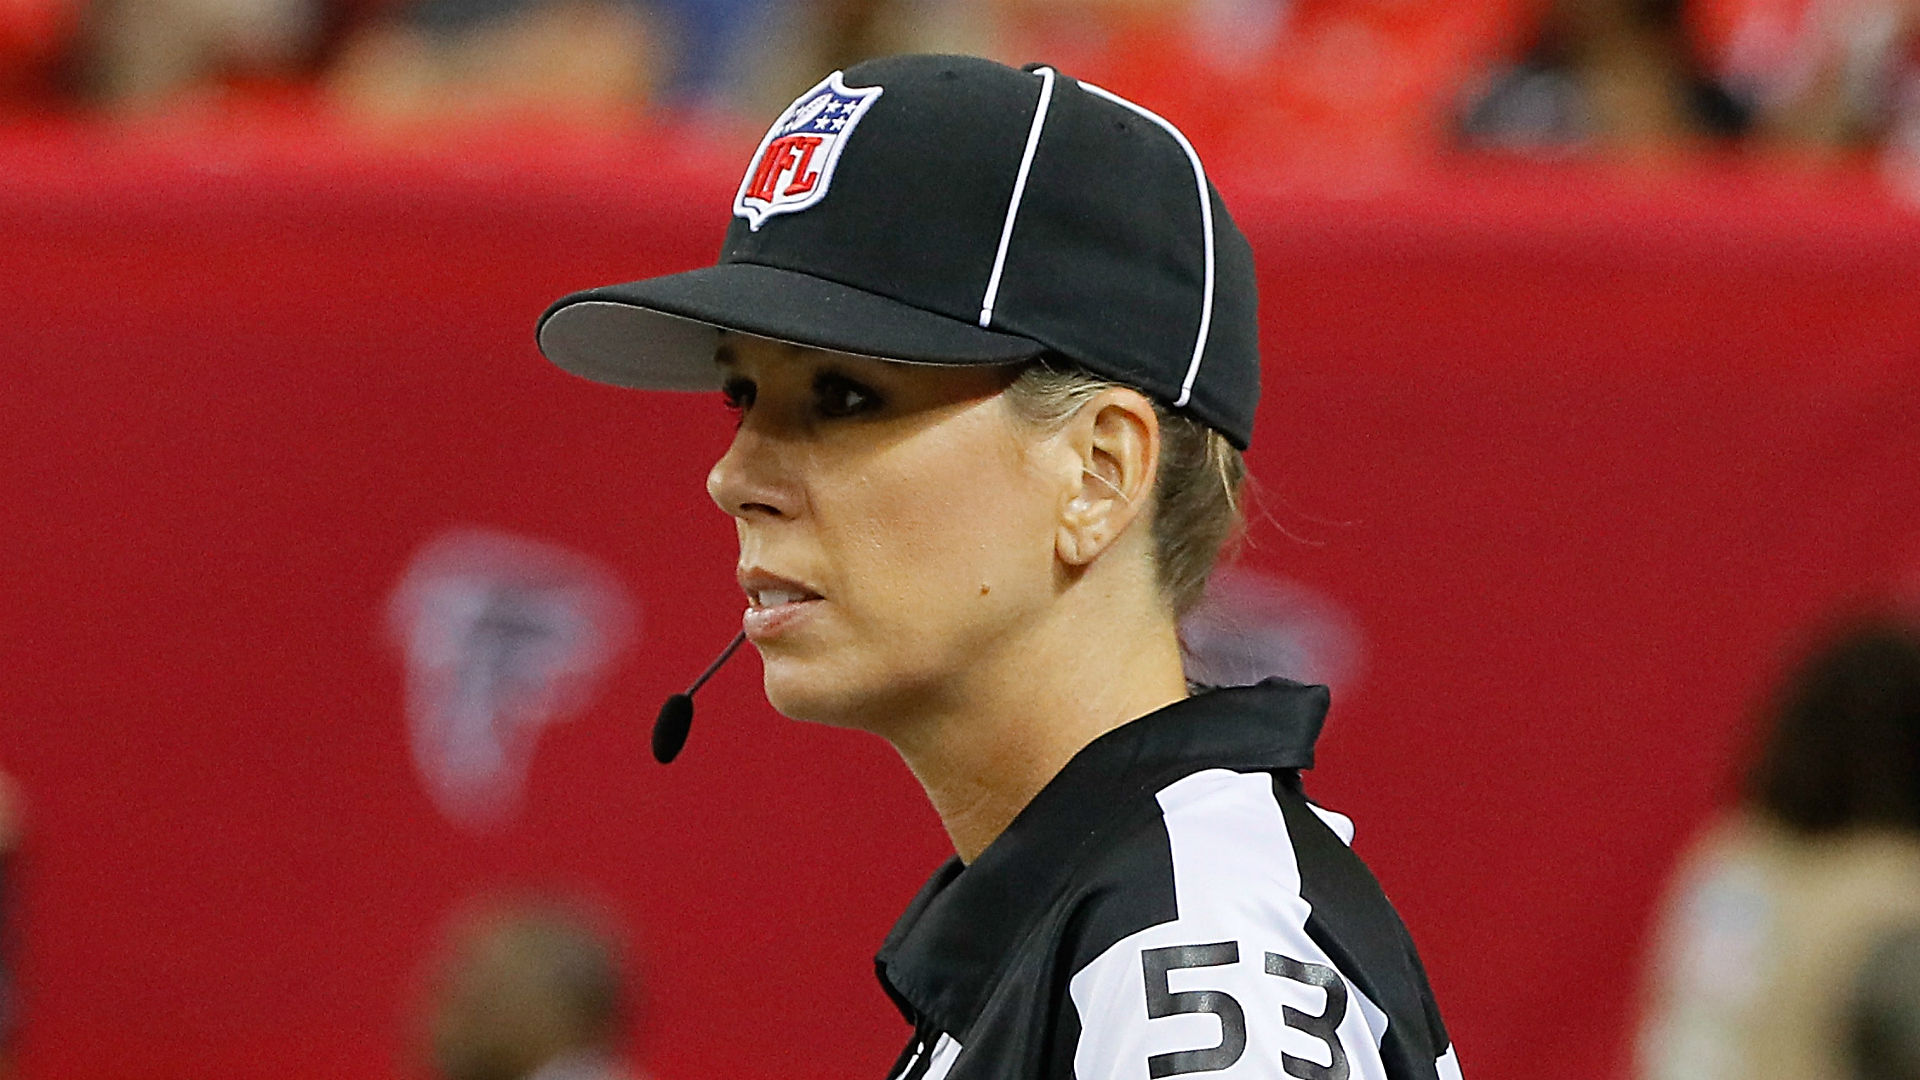 2019 NFL playoffs: Sarah Thomas to become first female official in postseason game